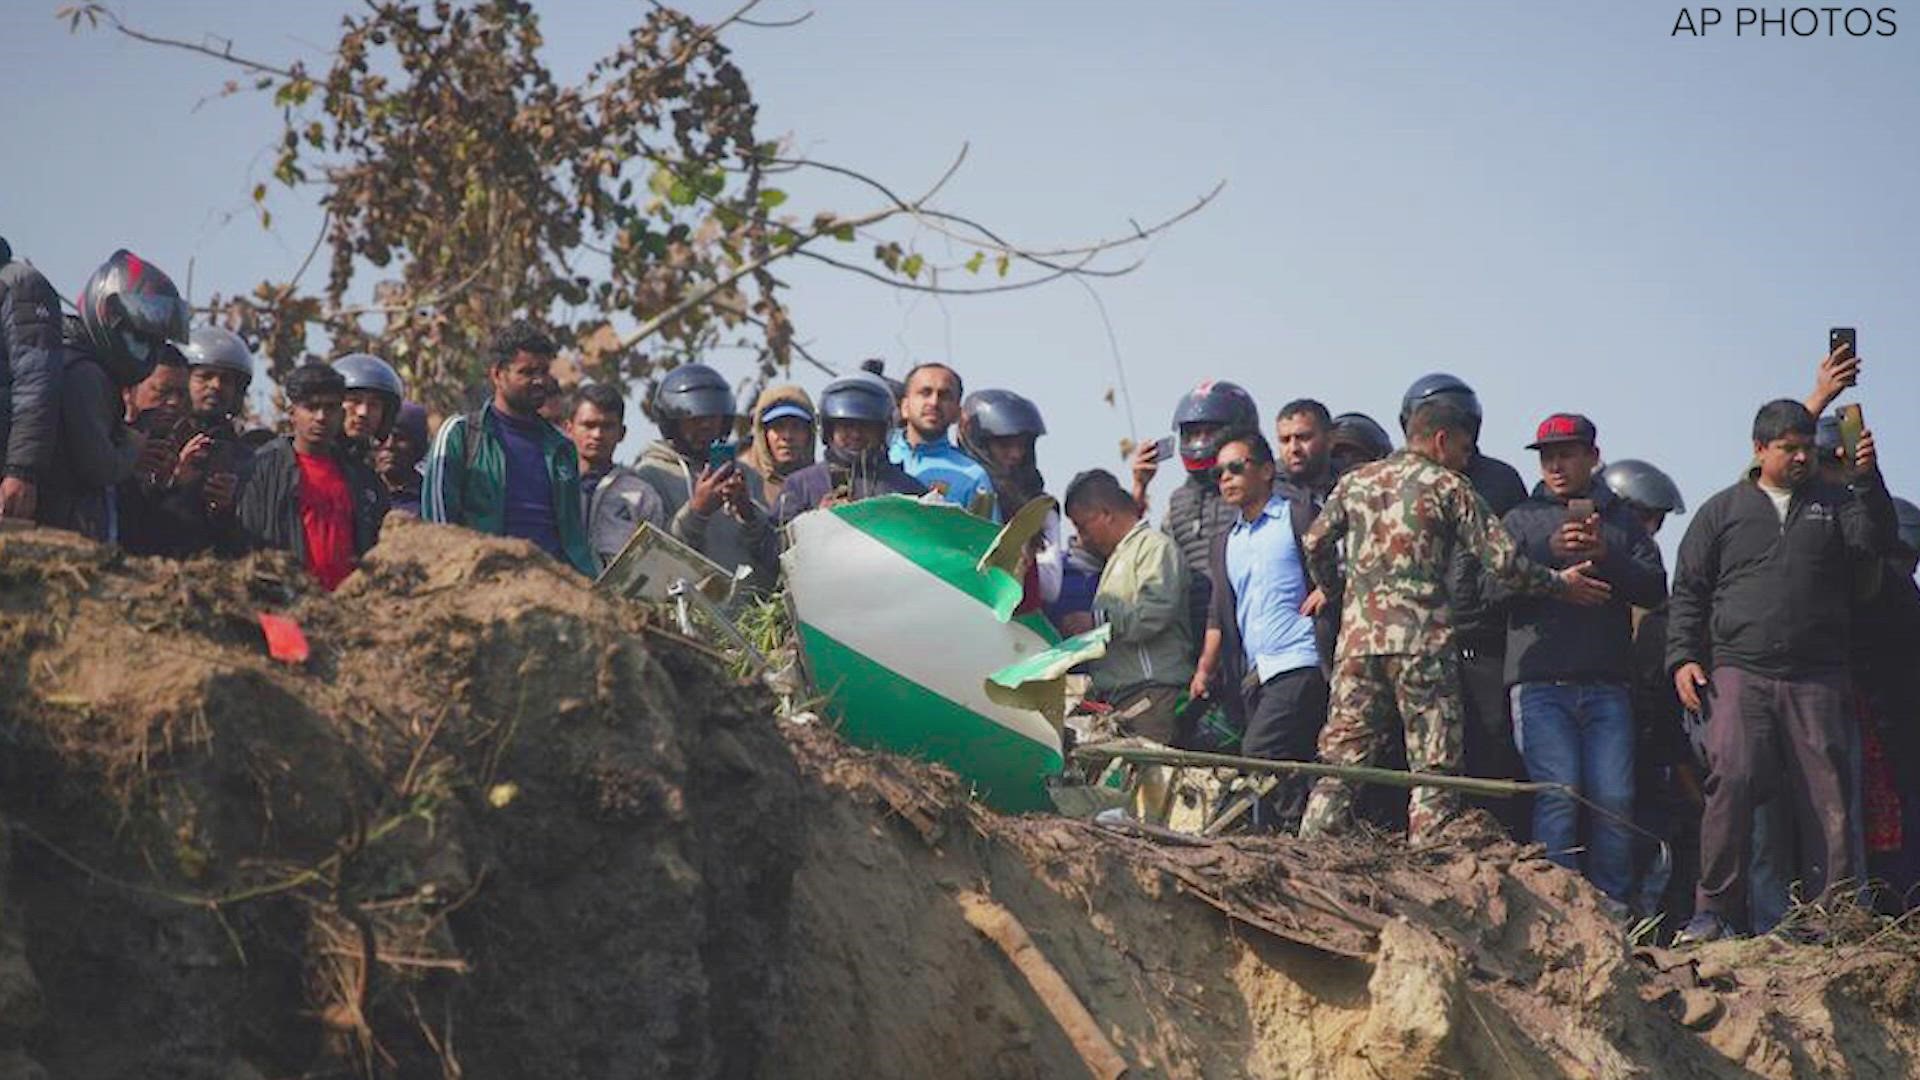 These still images show the wreckage in Nepal after a plane crashed in the Seti River Gorge near the city of Pokhara.